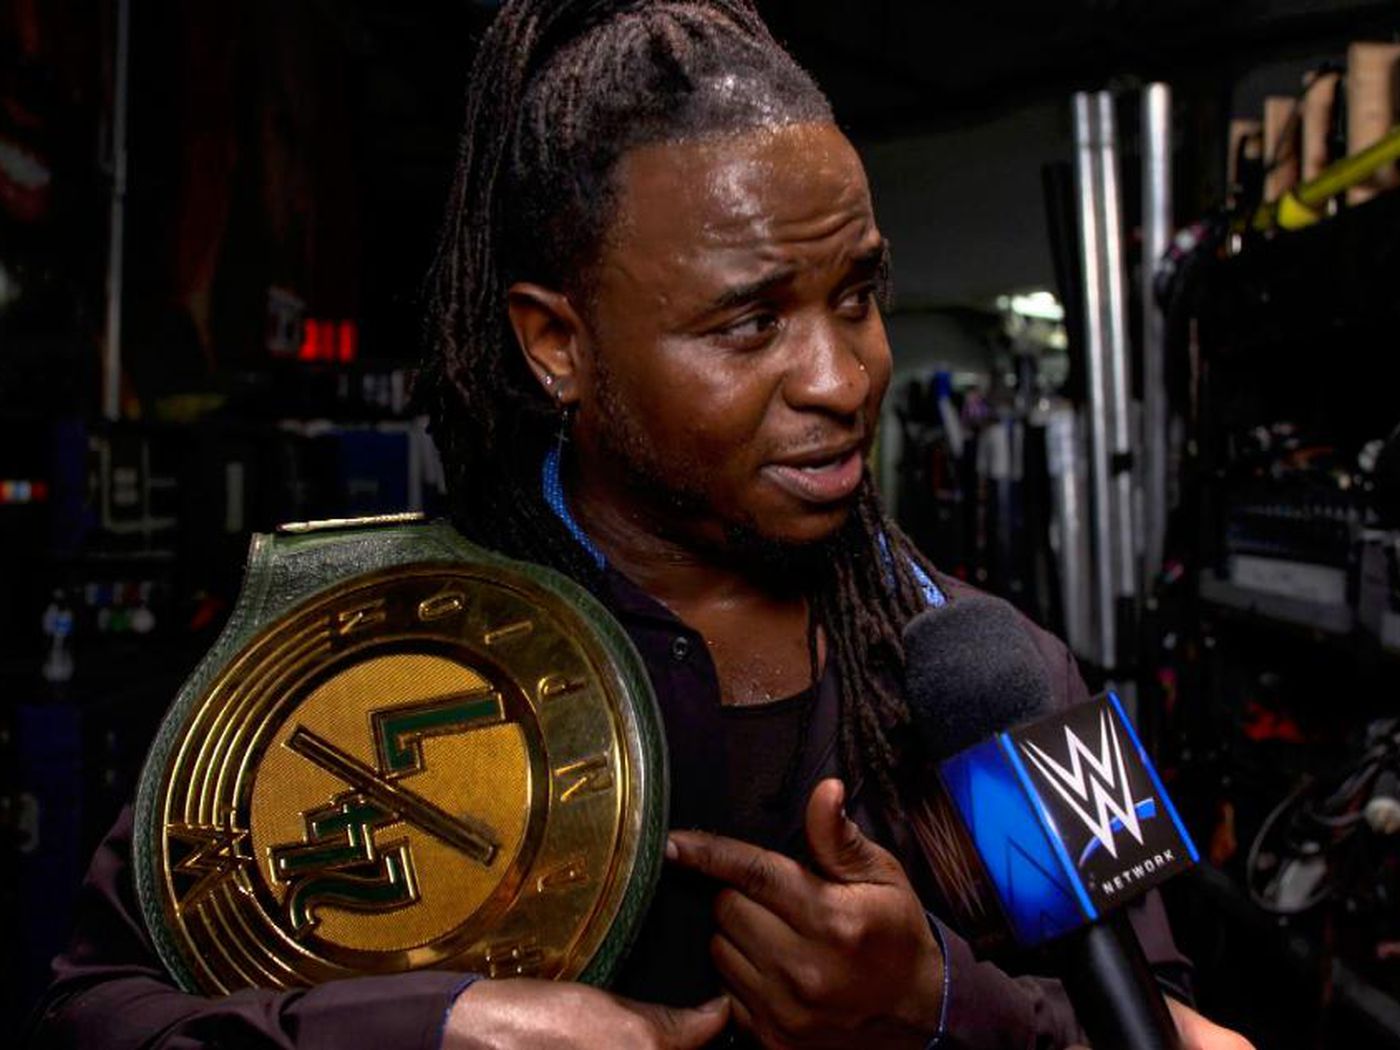 Reginald Discusses His Journey with the WWE 24/7 Championship and Interaction with a Number of ECW Legends